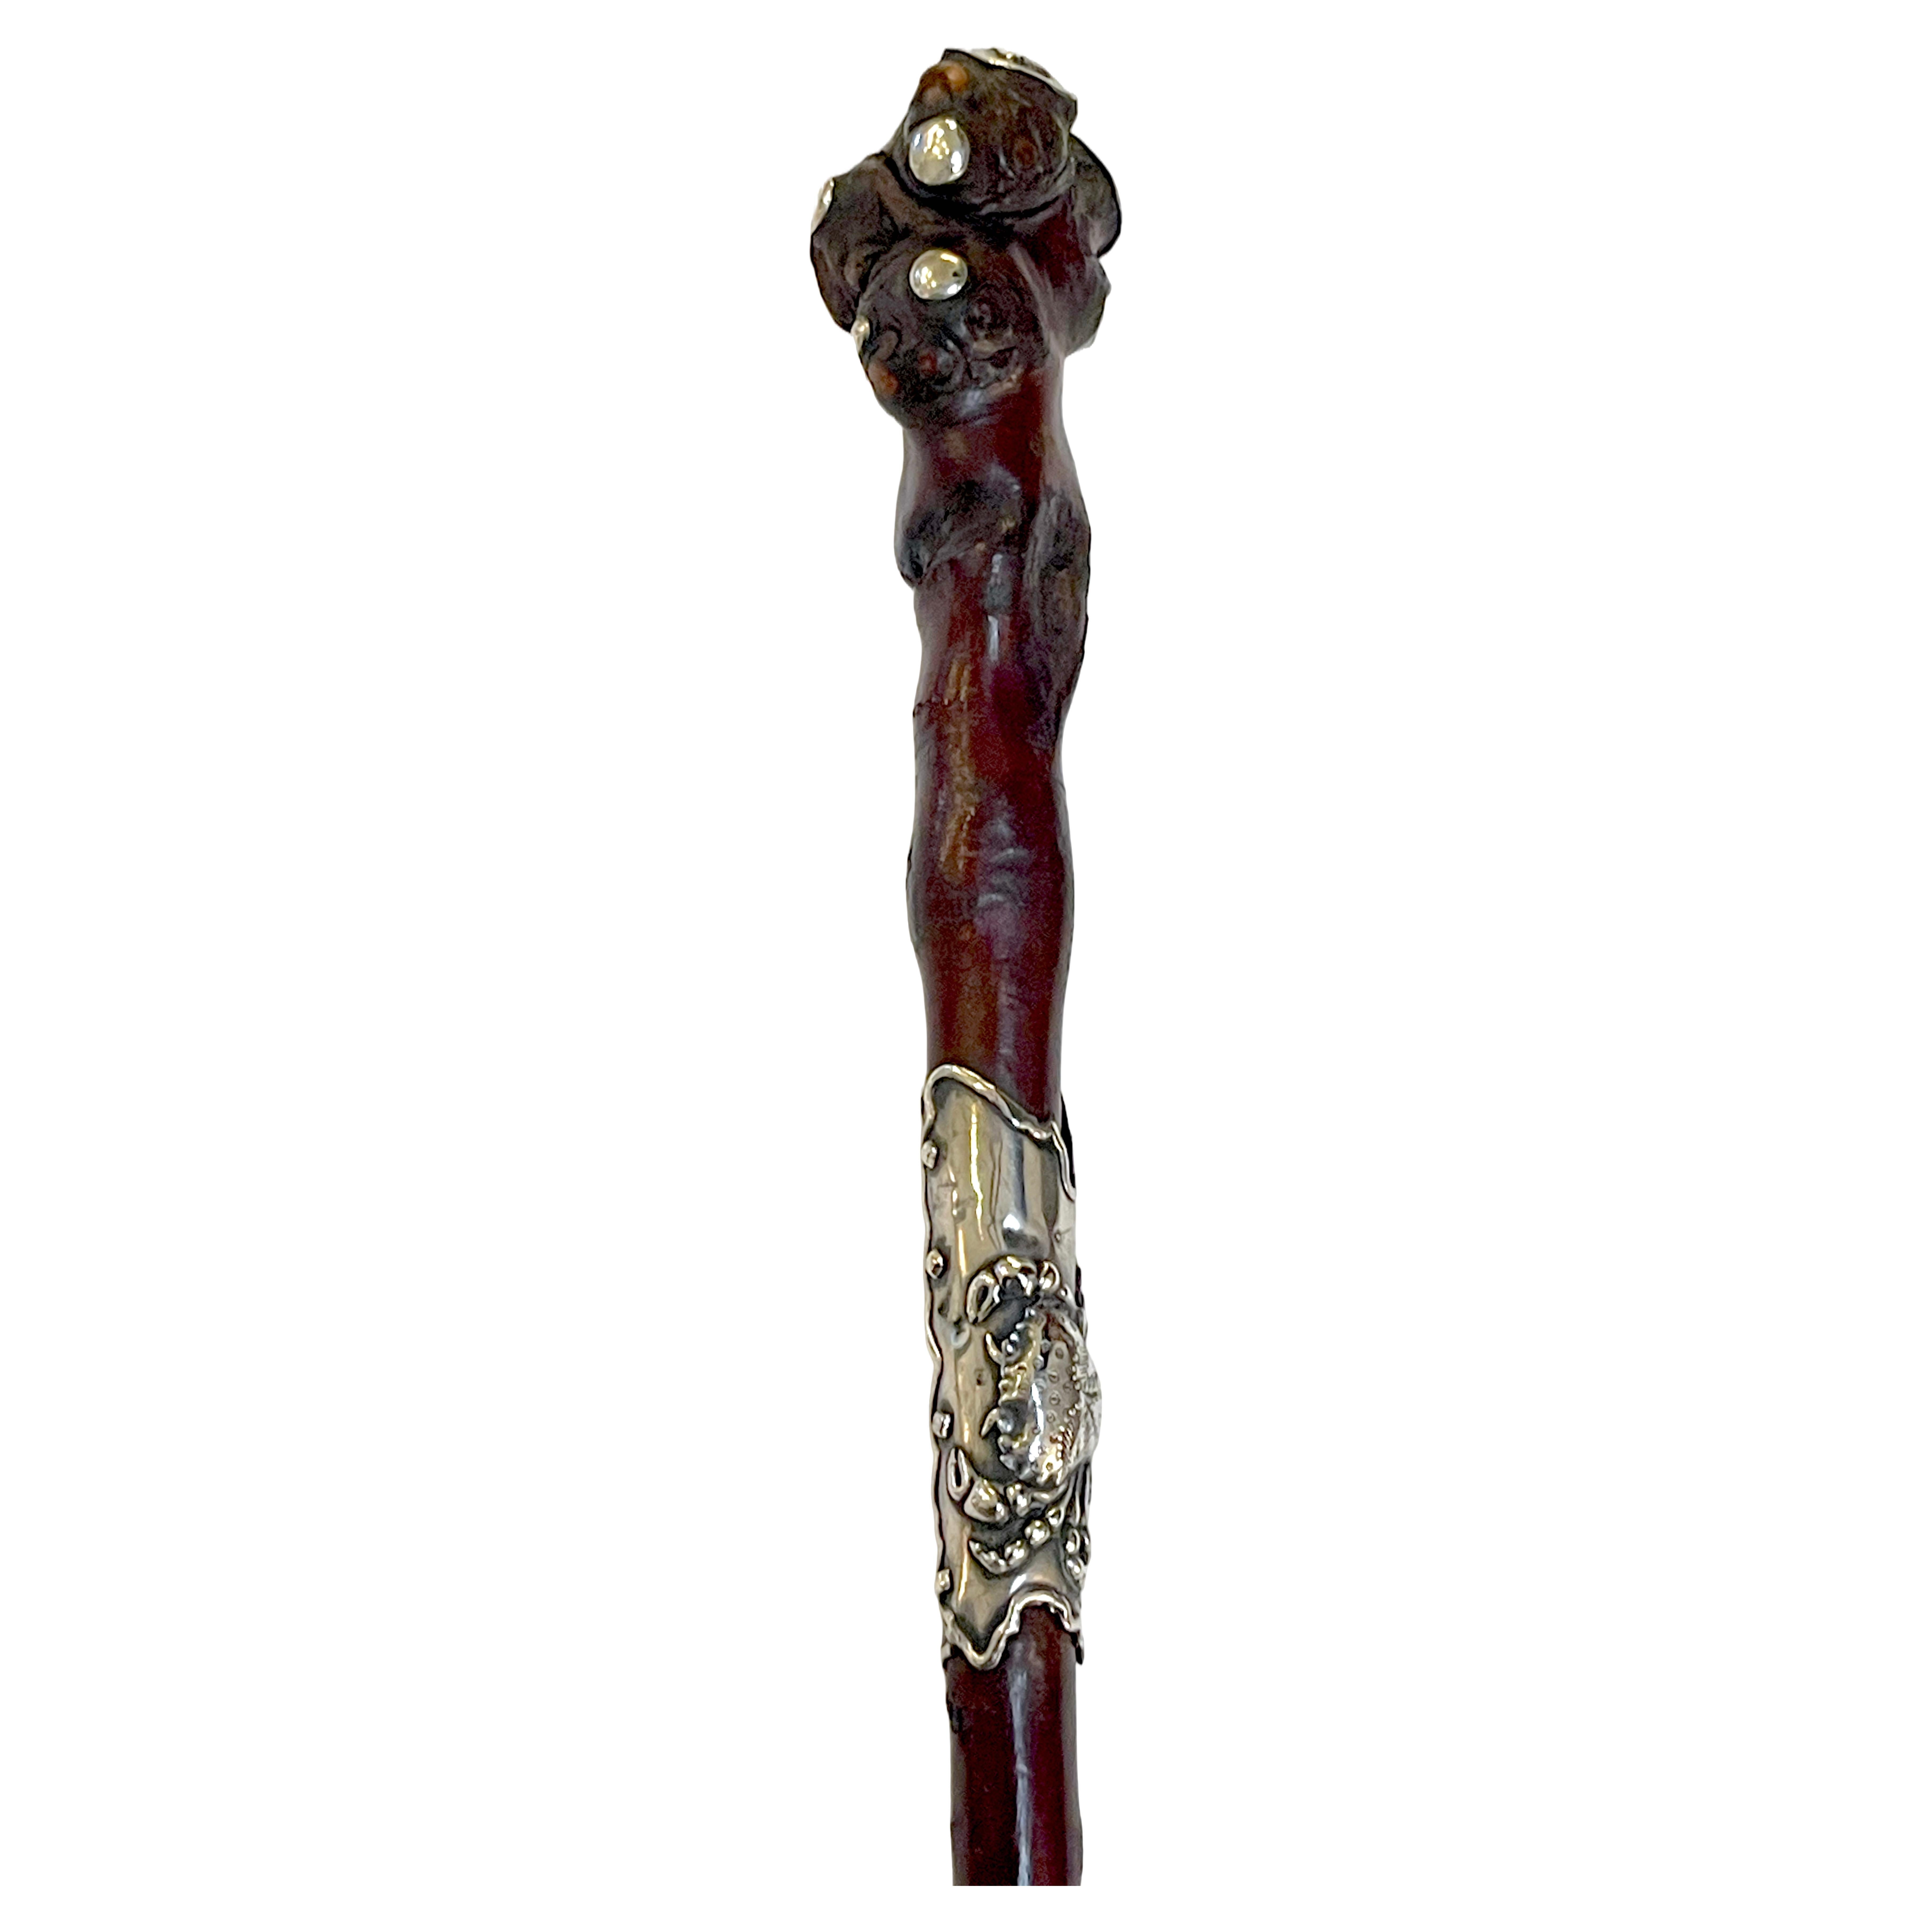 American Aesthetic/Japonisme Sterling Mounted Root Cane Attributed to Gorham

An exquisite American Aesthetic/Japonisme Sterling Mounted Root Cane, Attributed to Gorham date lettered 'F' for 1873. This 35-inch masterwork features a natural root